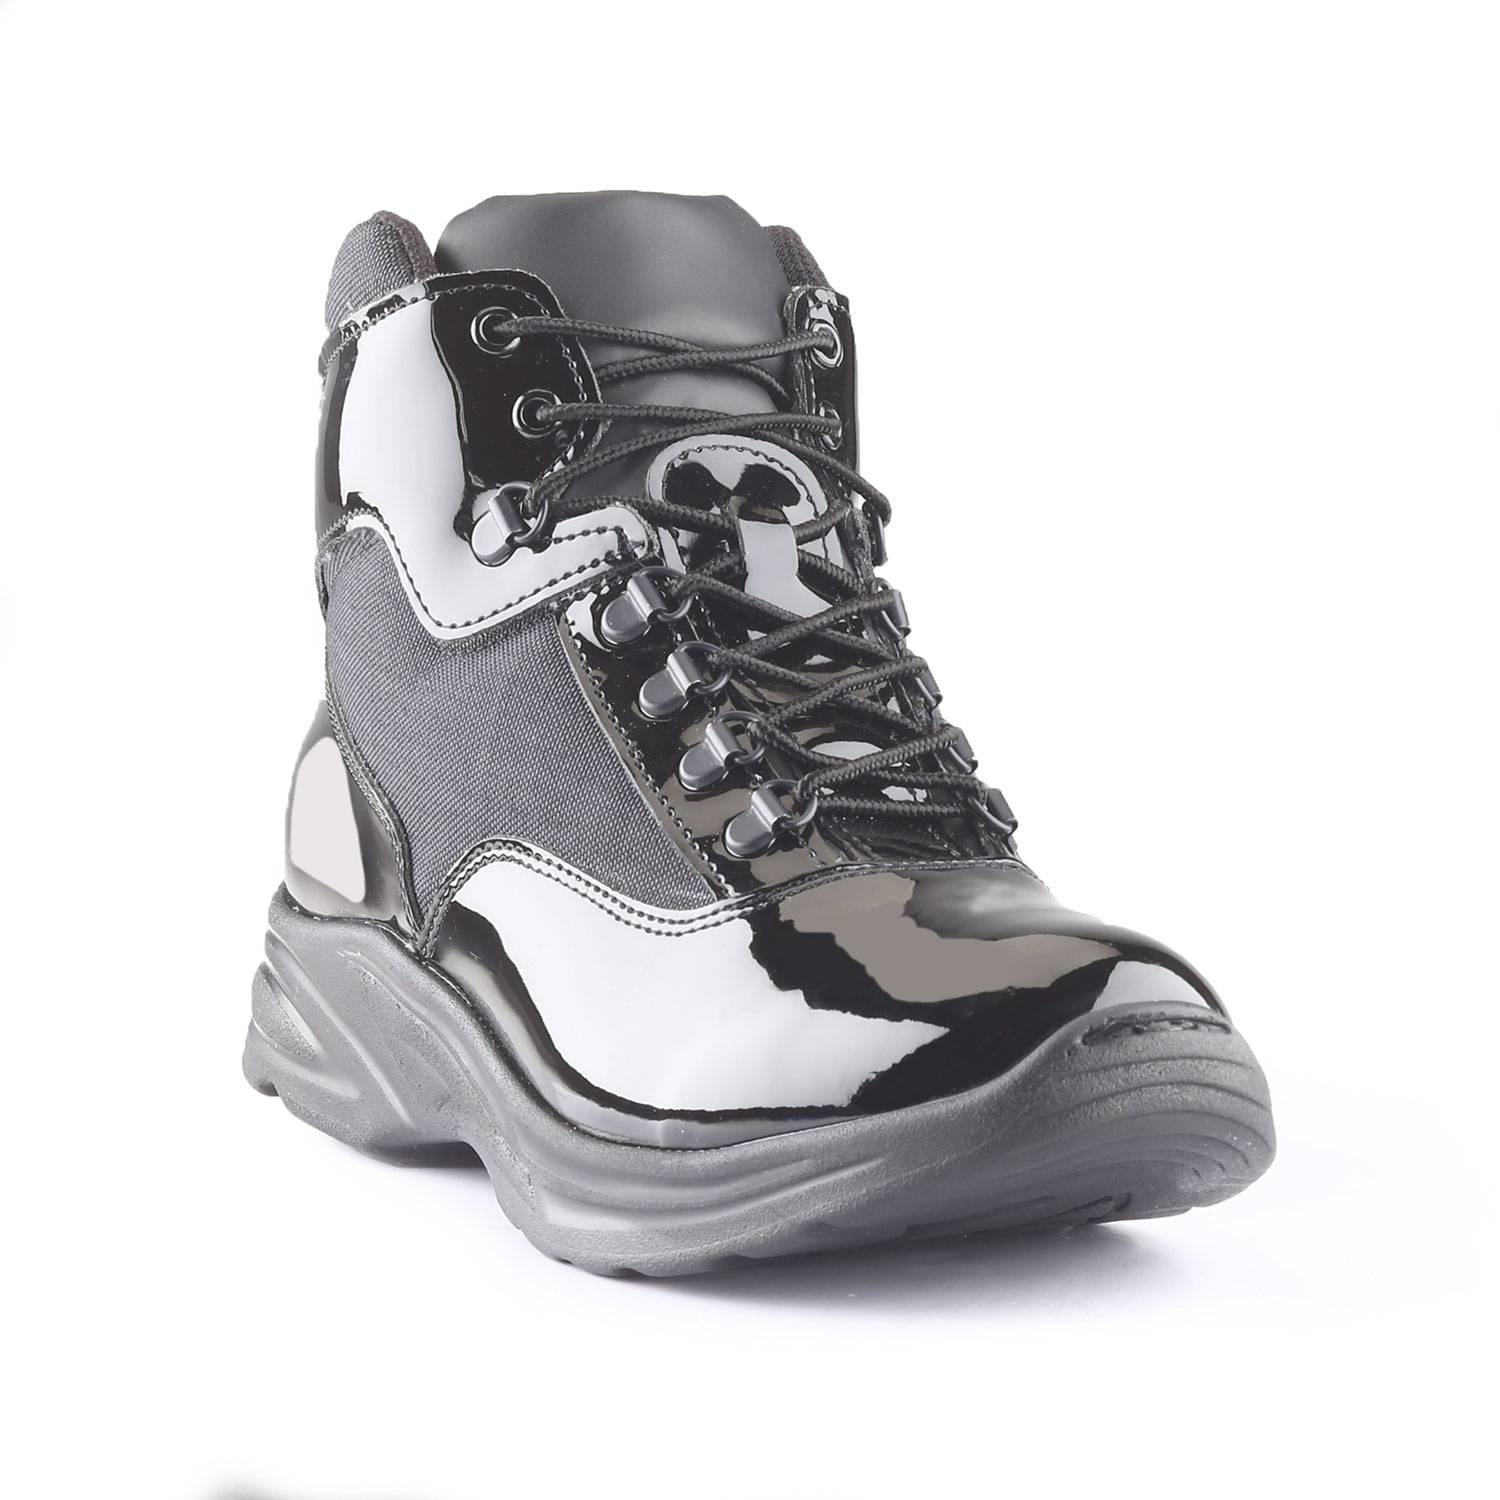 Details about   THOROGOOD UNIFORM SOFTSTREETS ULTIMATE CROSS TRAINER BOOTS 834-6874 ALL SIZES 